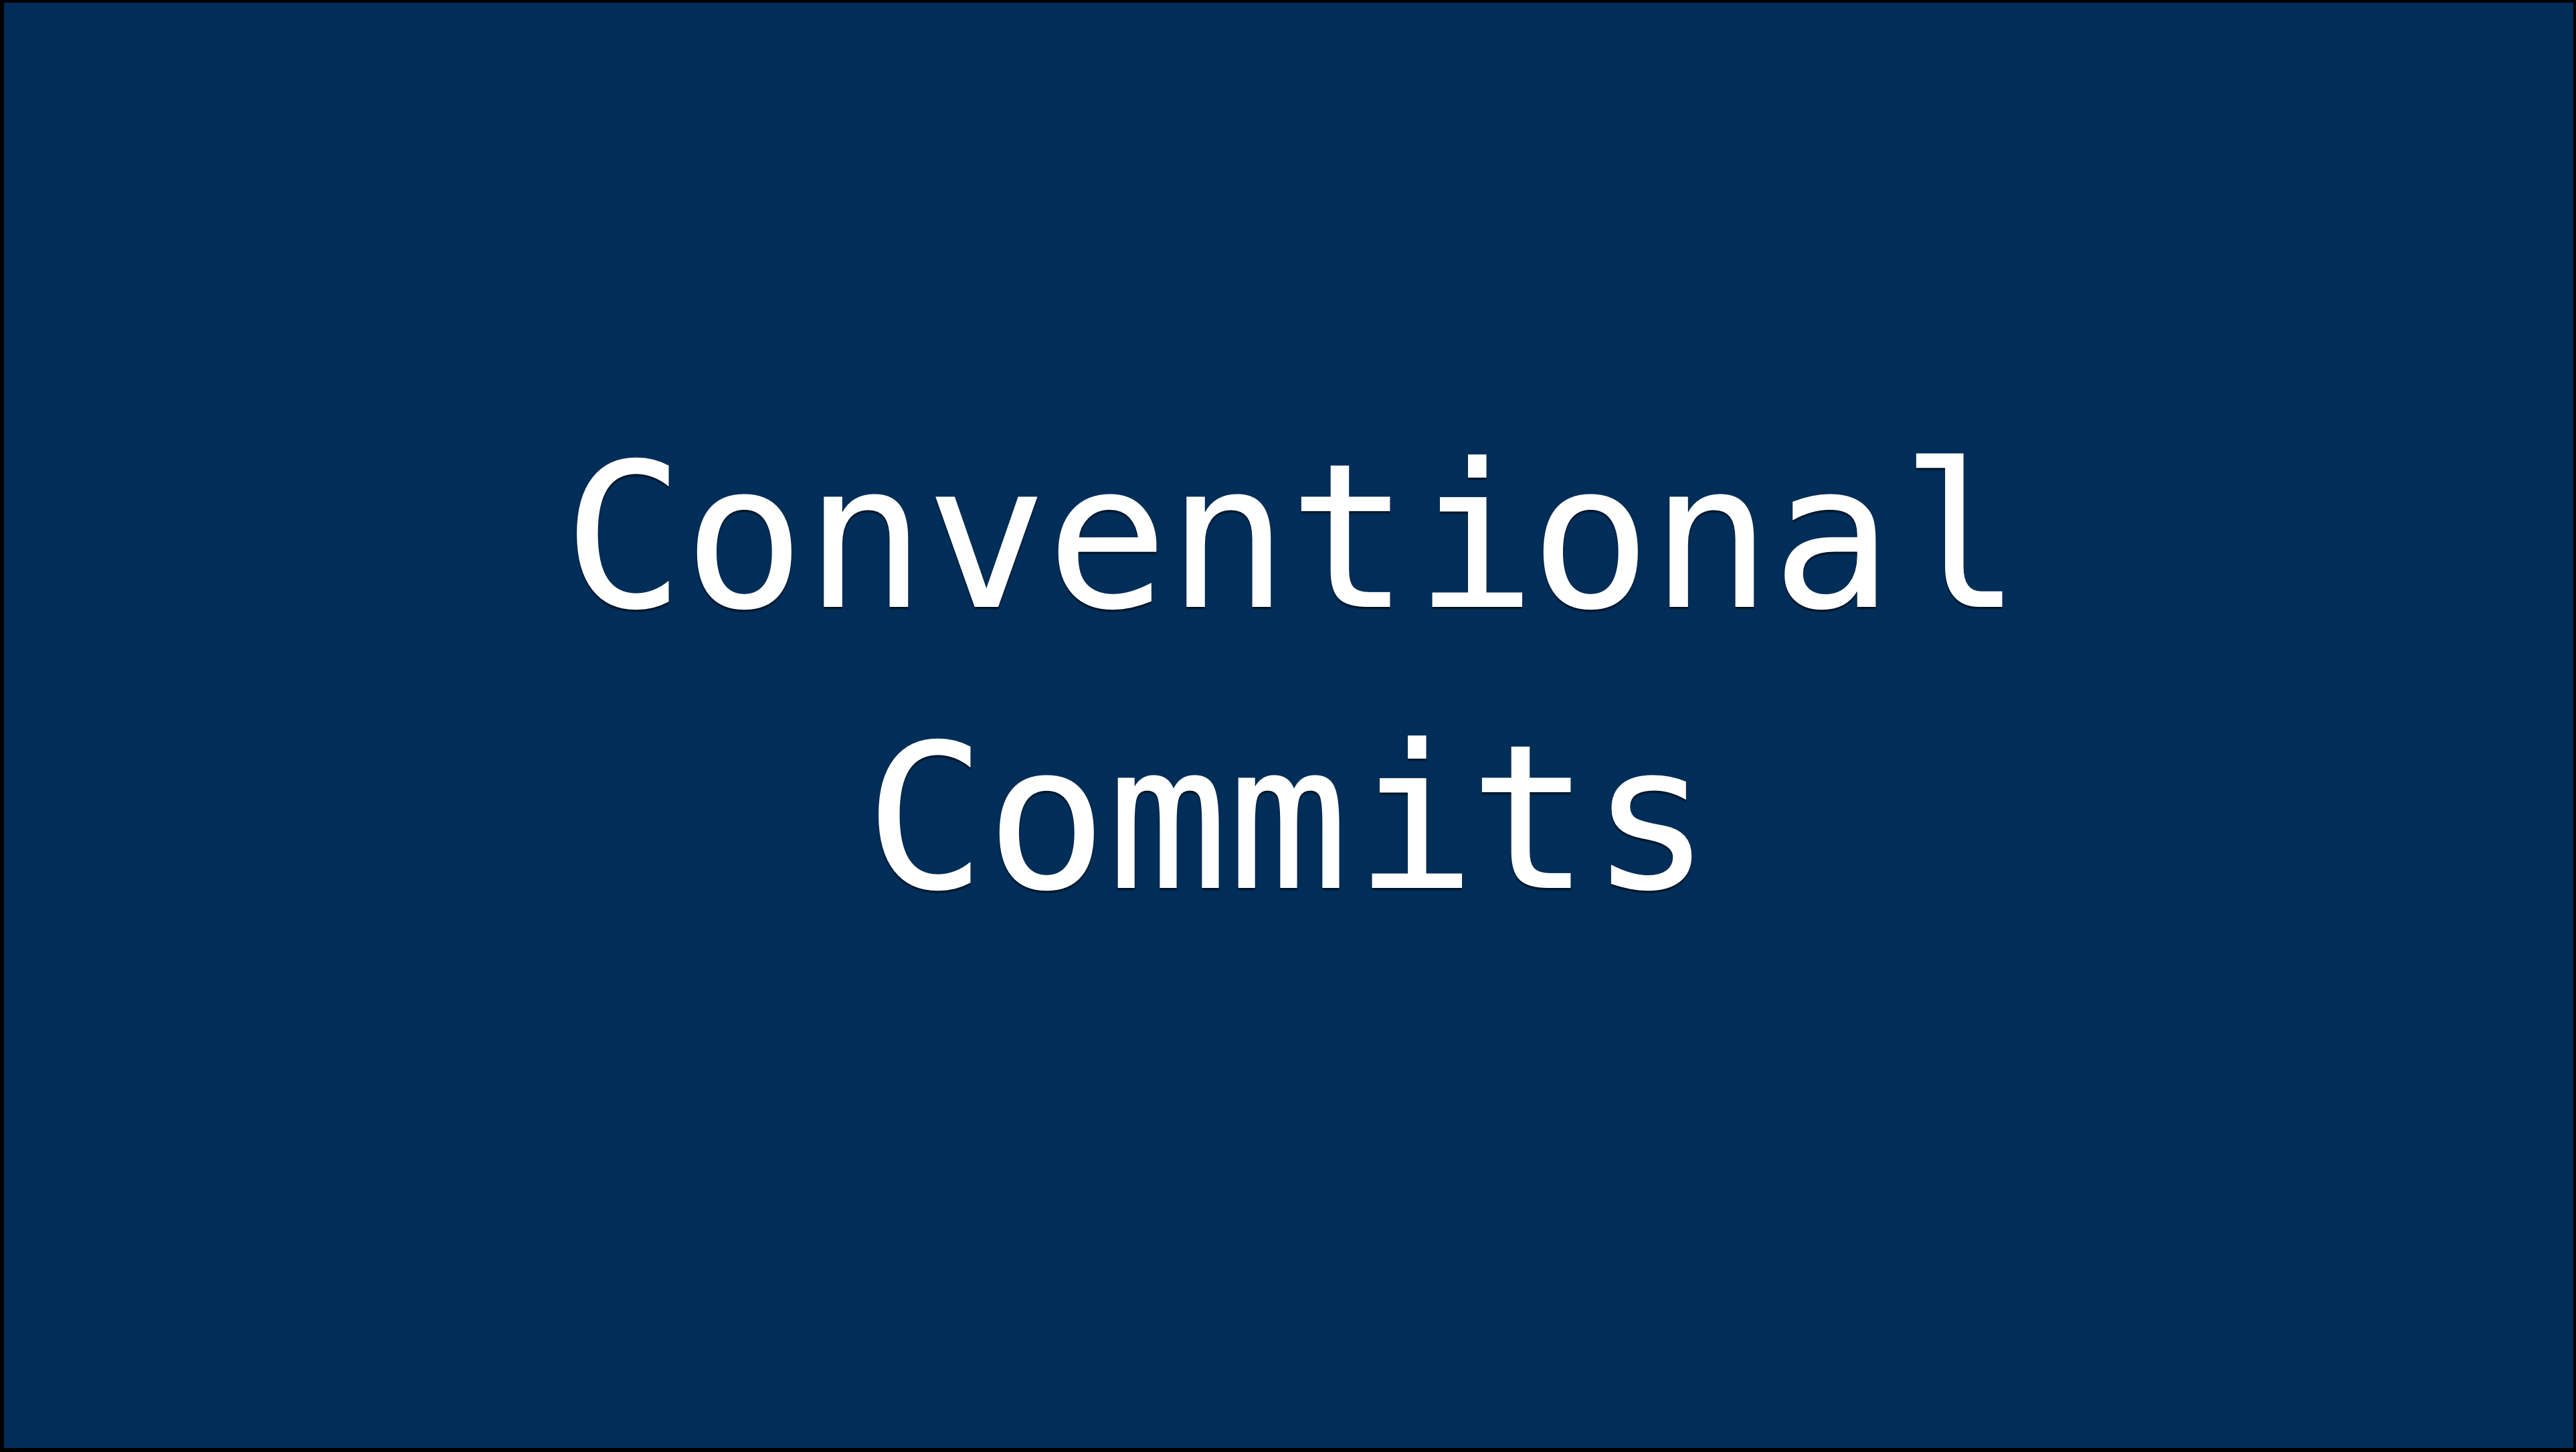 The text 'Conventional Commits' with a blue background.